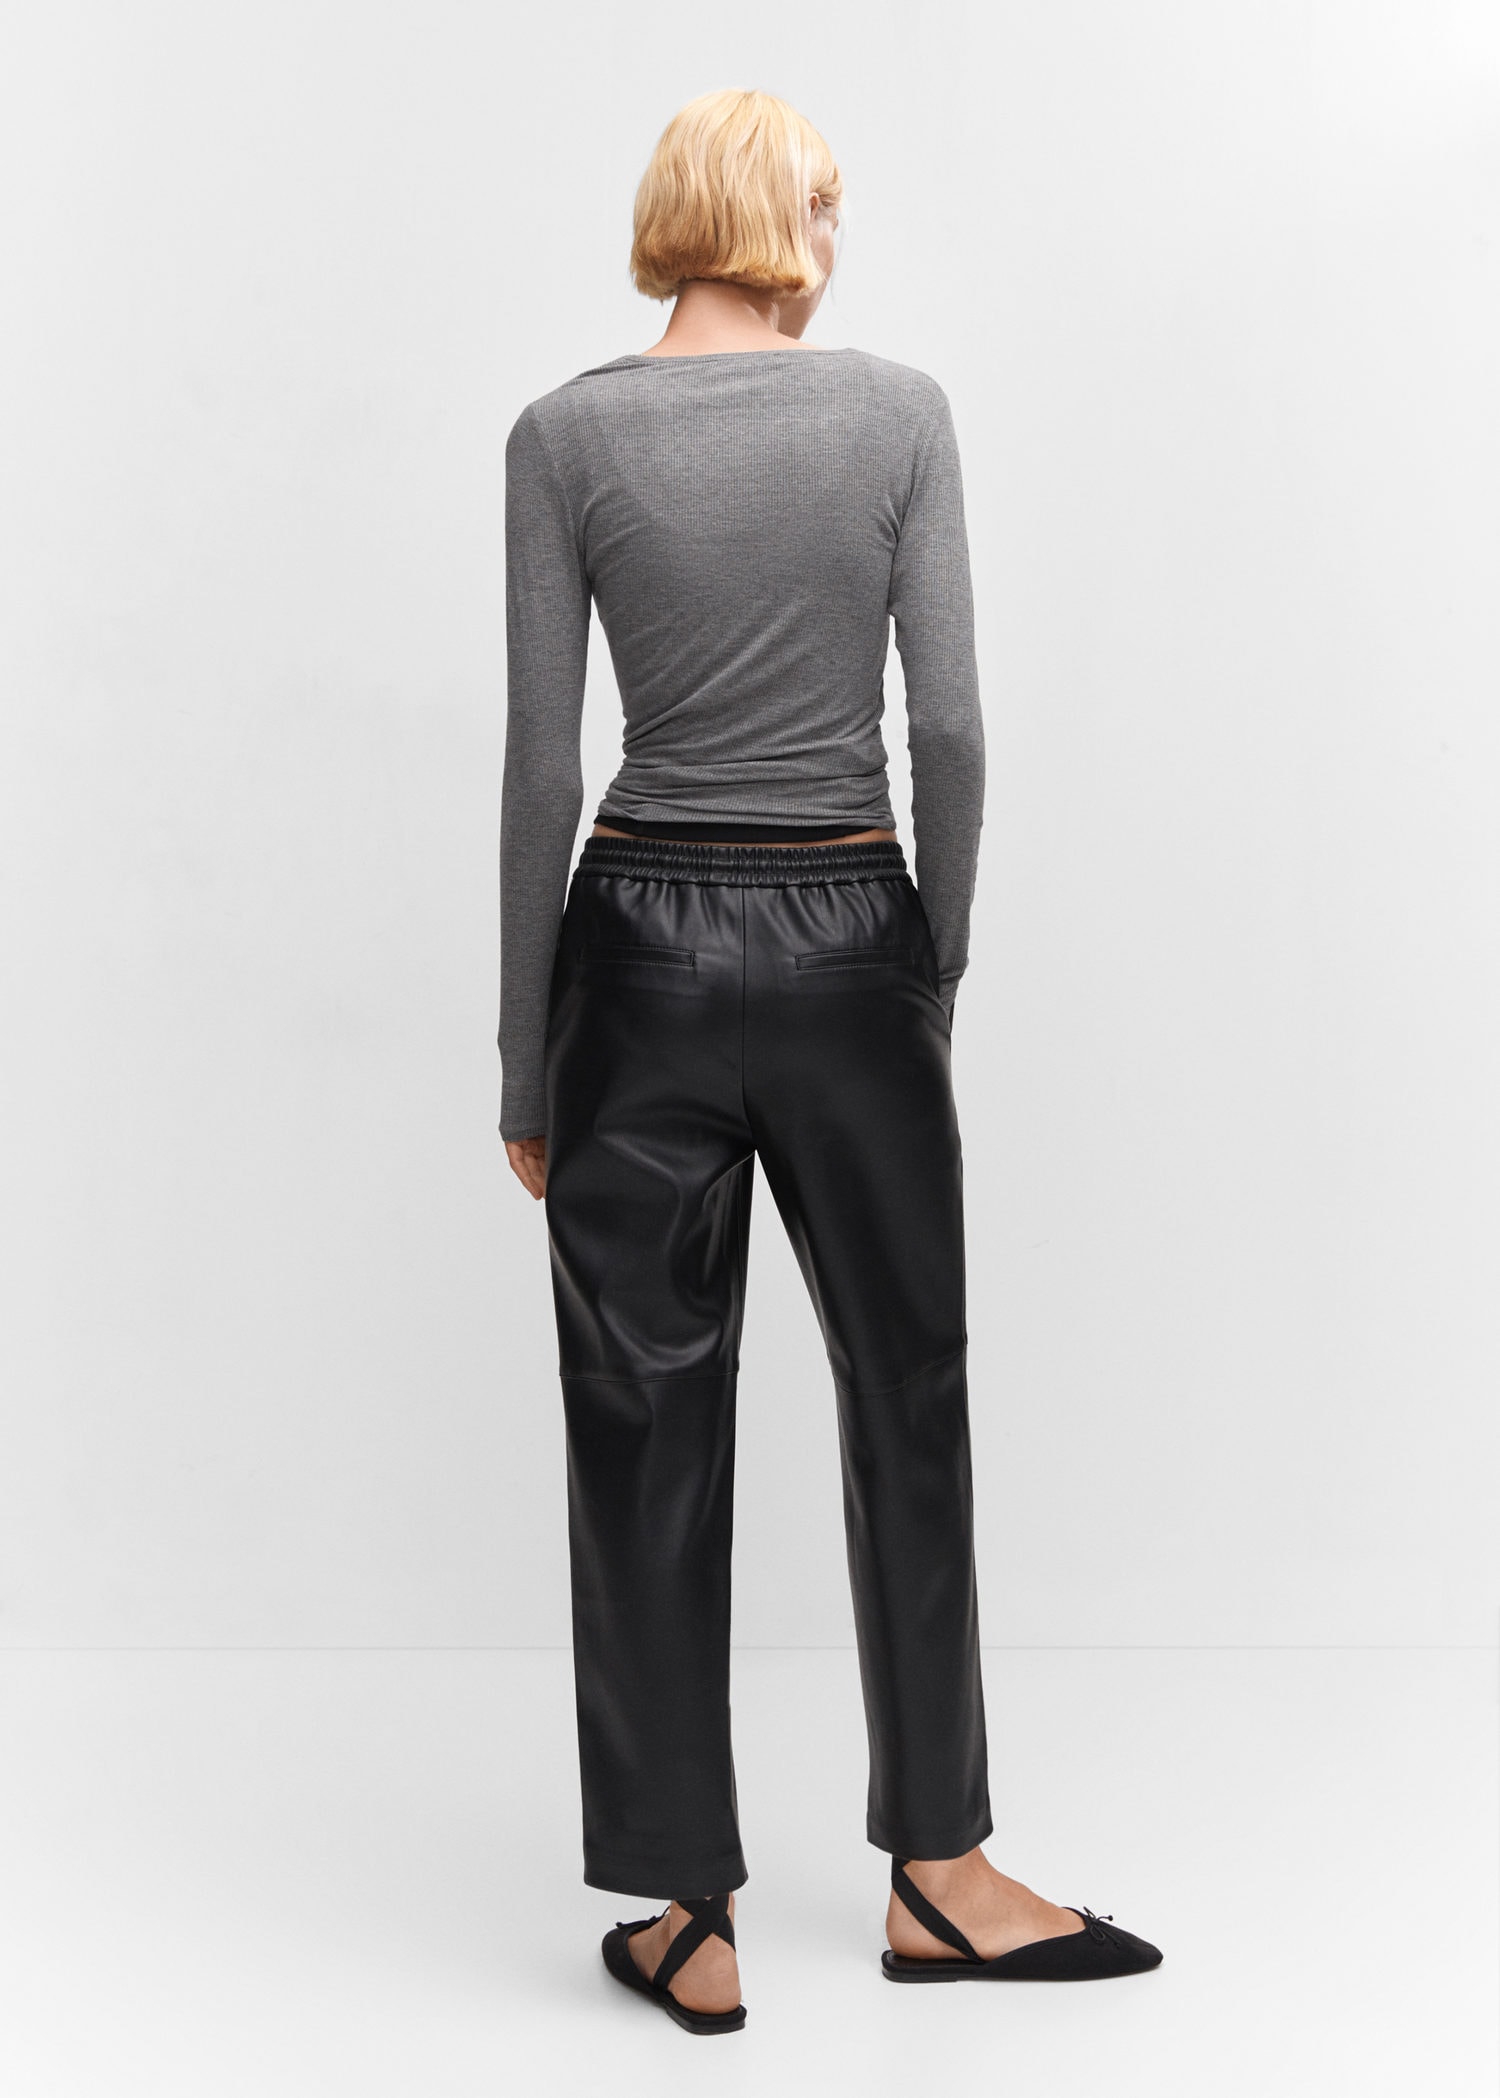 Mango Faux Leather High Waist Trousers, Black at John Lewis & Partners